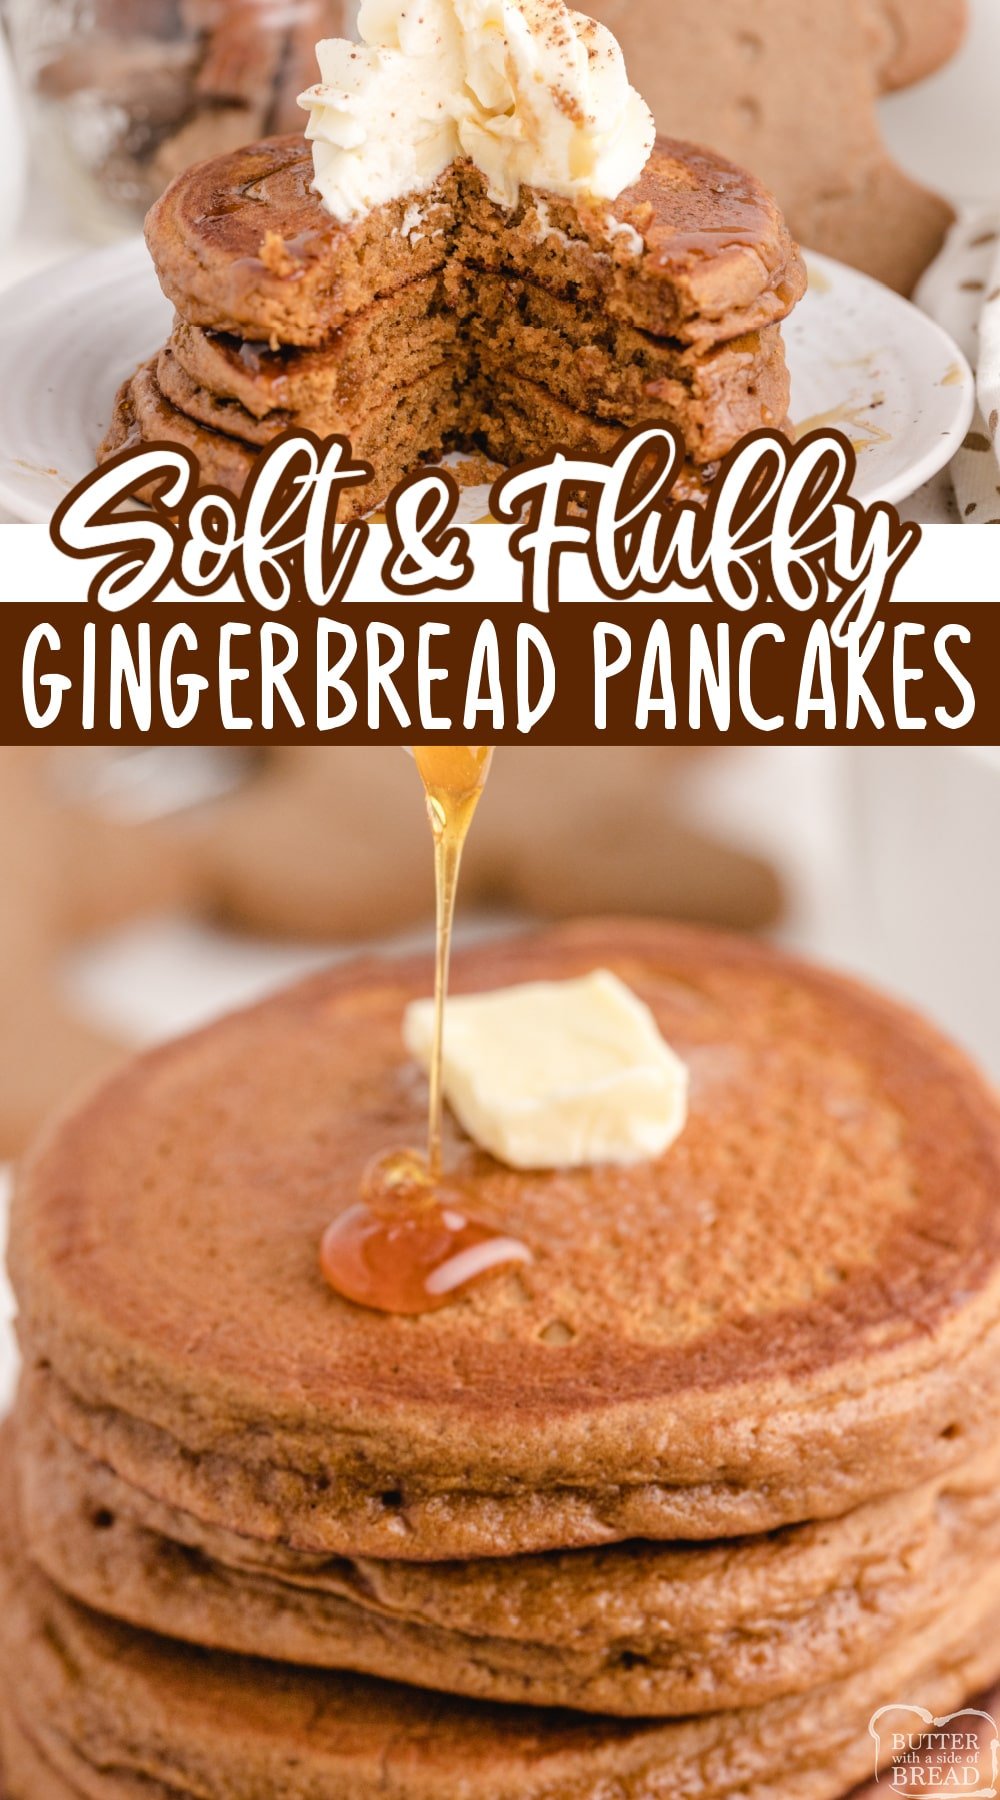 Gingerbread Pancakes made from scratch with cinnamon, cloves and molasses for the perfect gingerbread flavor. Light and fluffy gingerbread pancake recipe that turns out perfectly every time! 